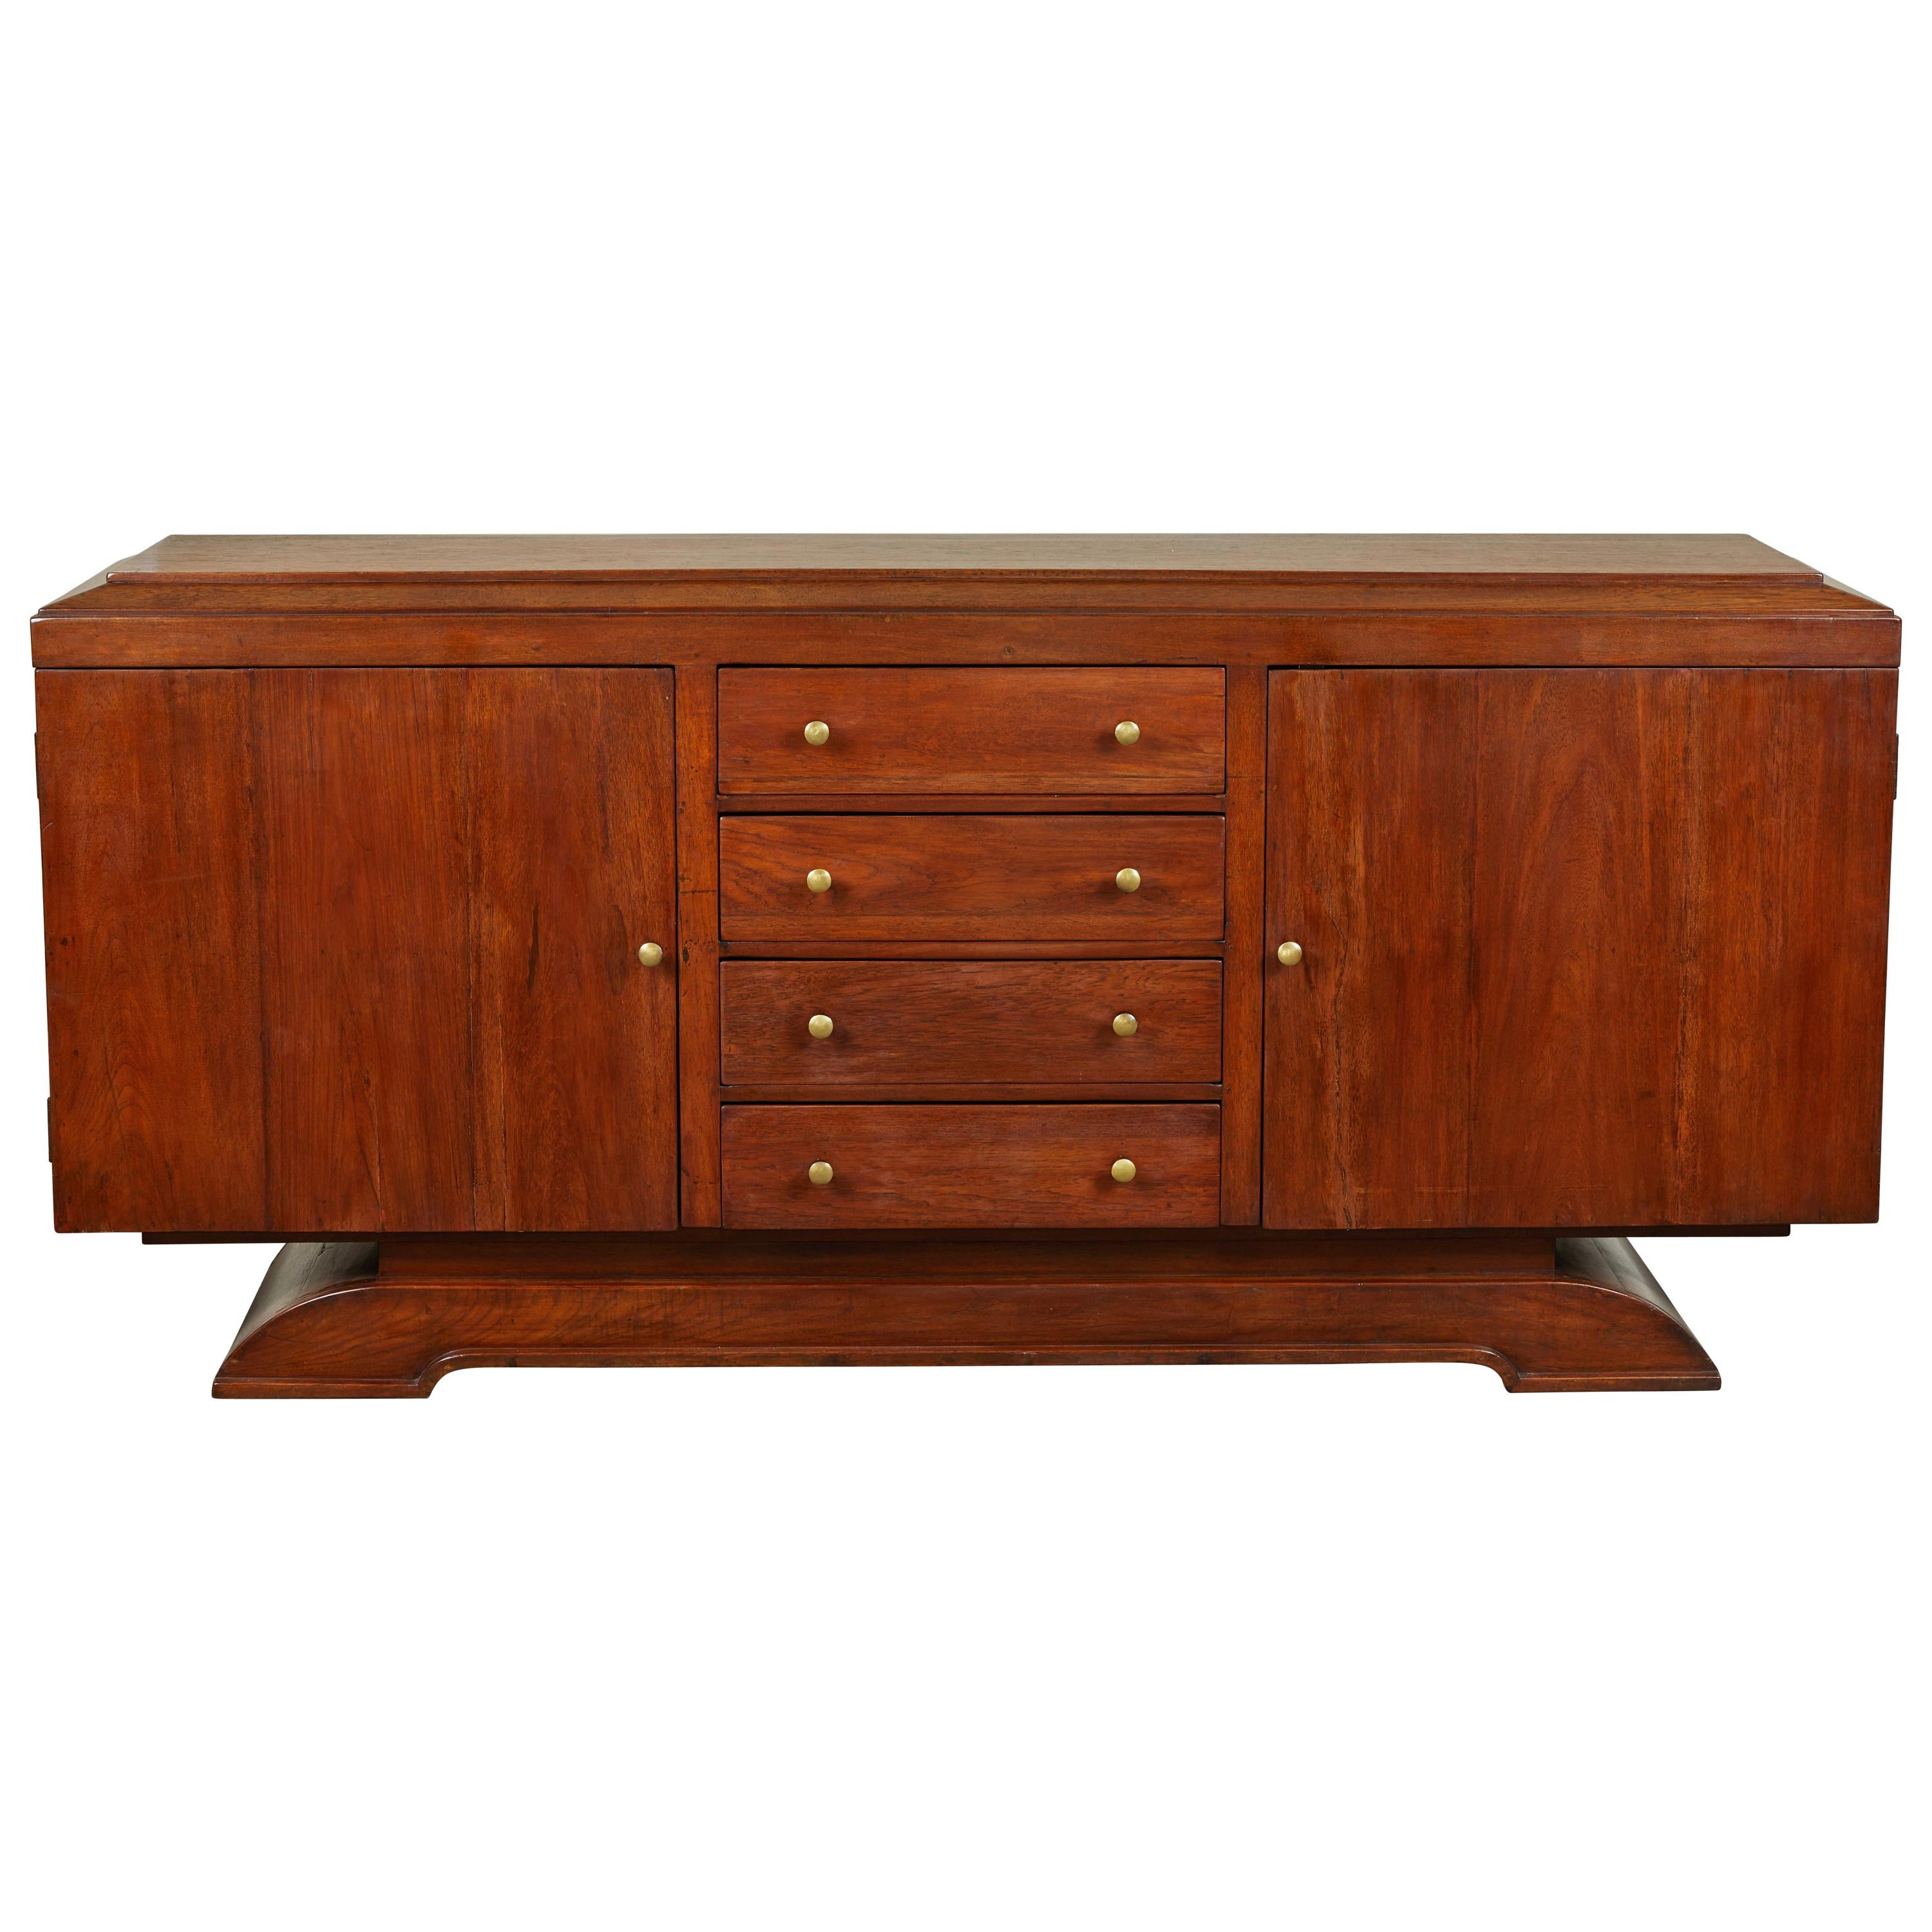 Early 20th Century Colonial Art Deco Rosewood Sideboard